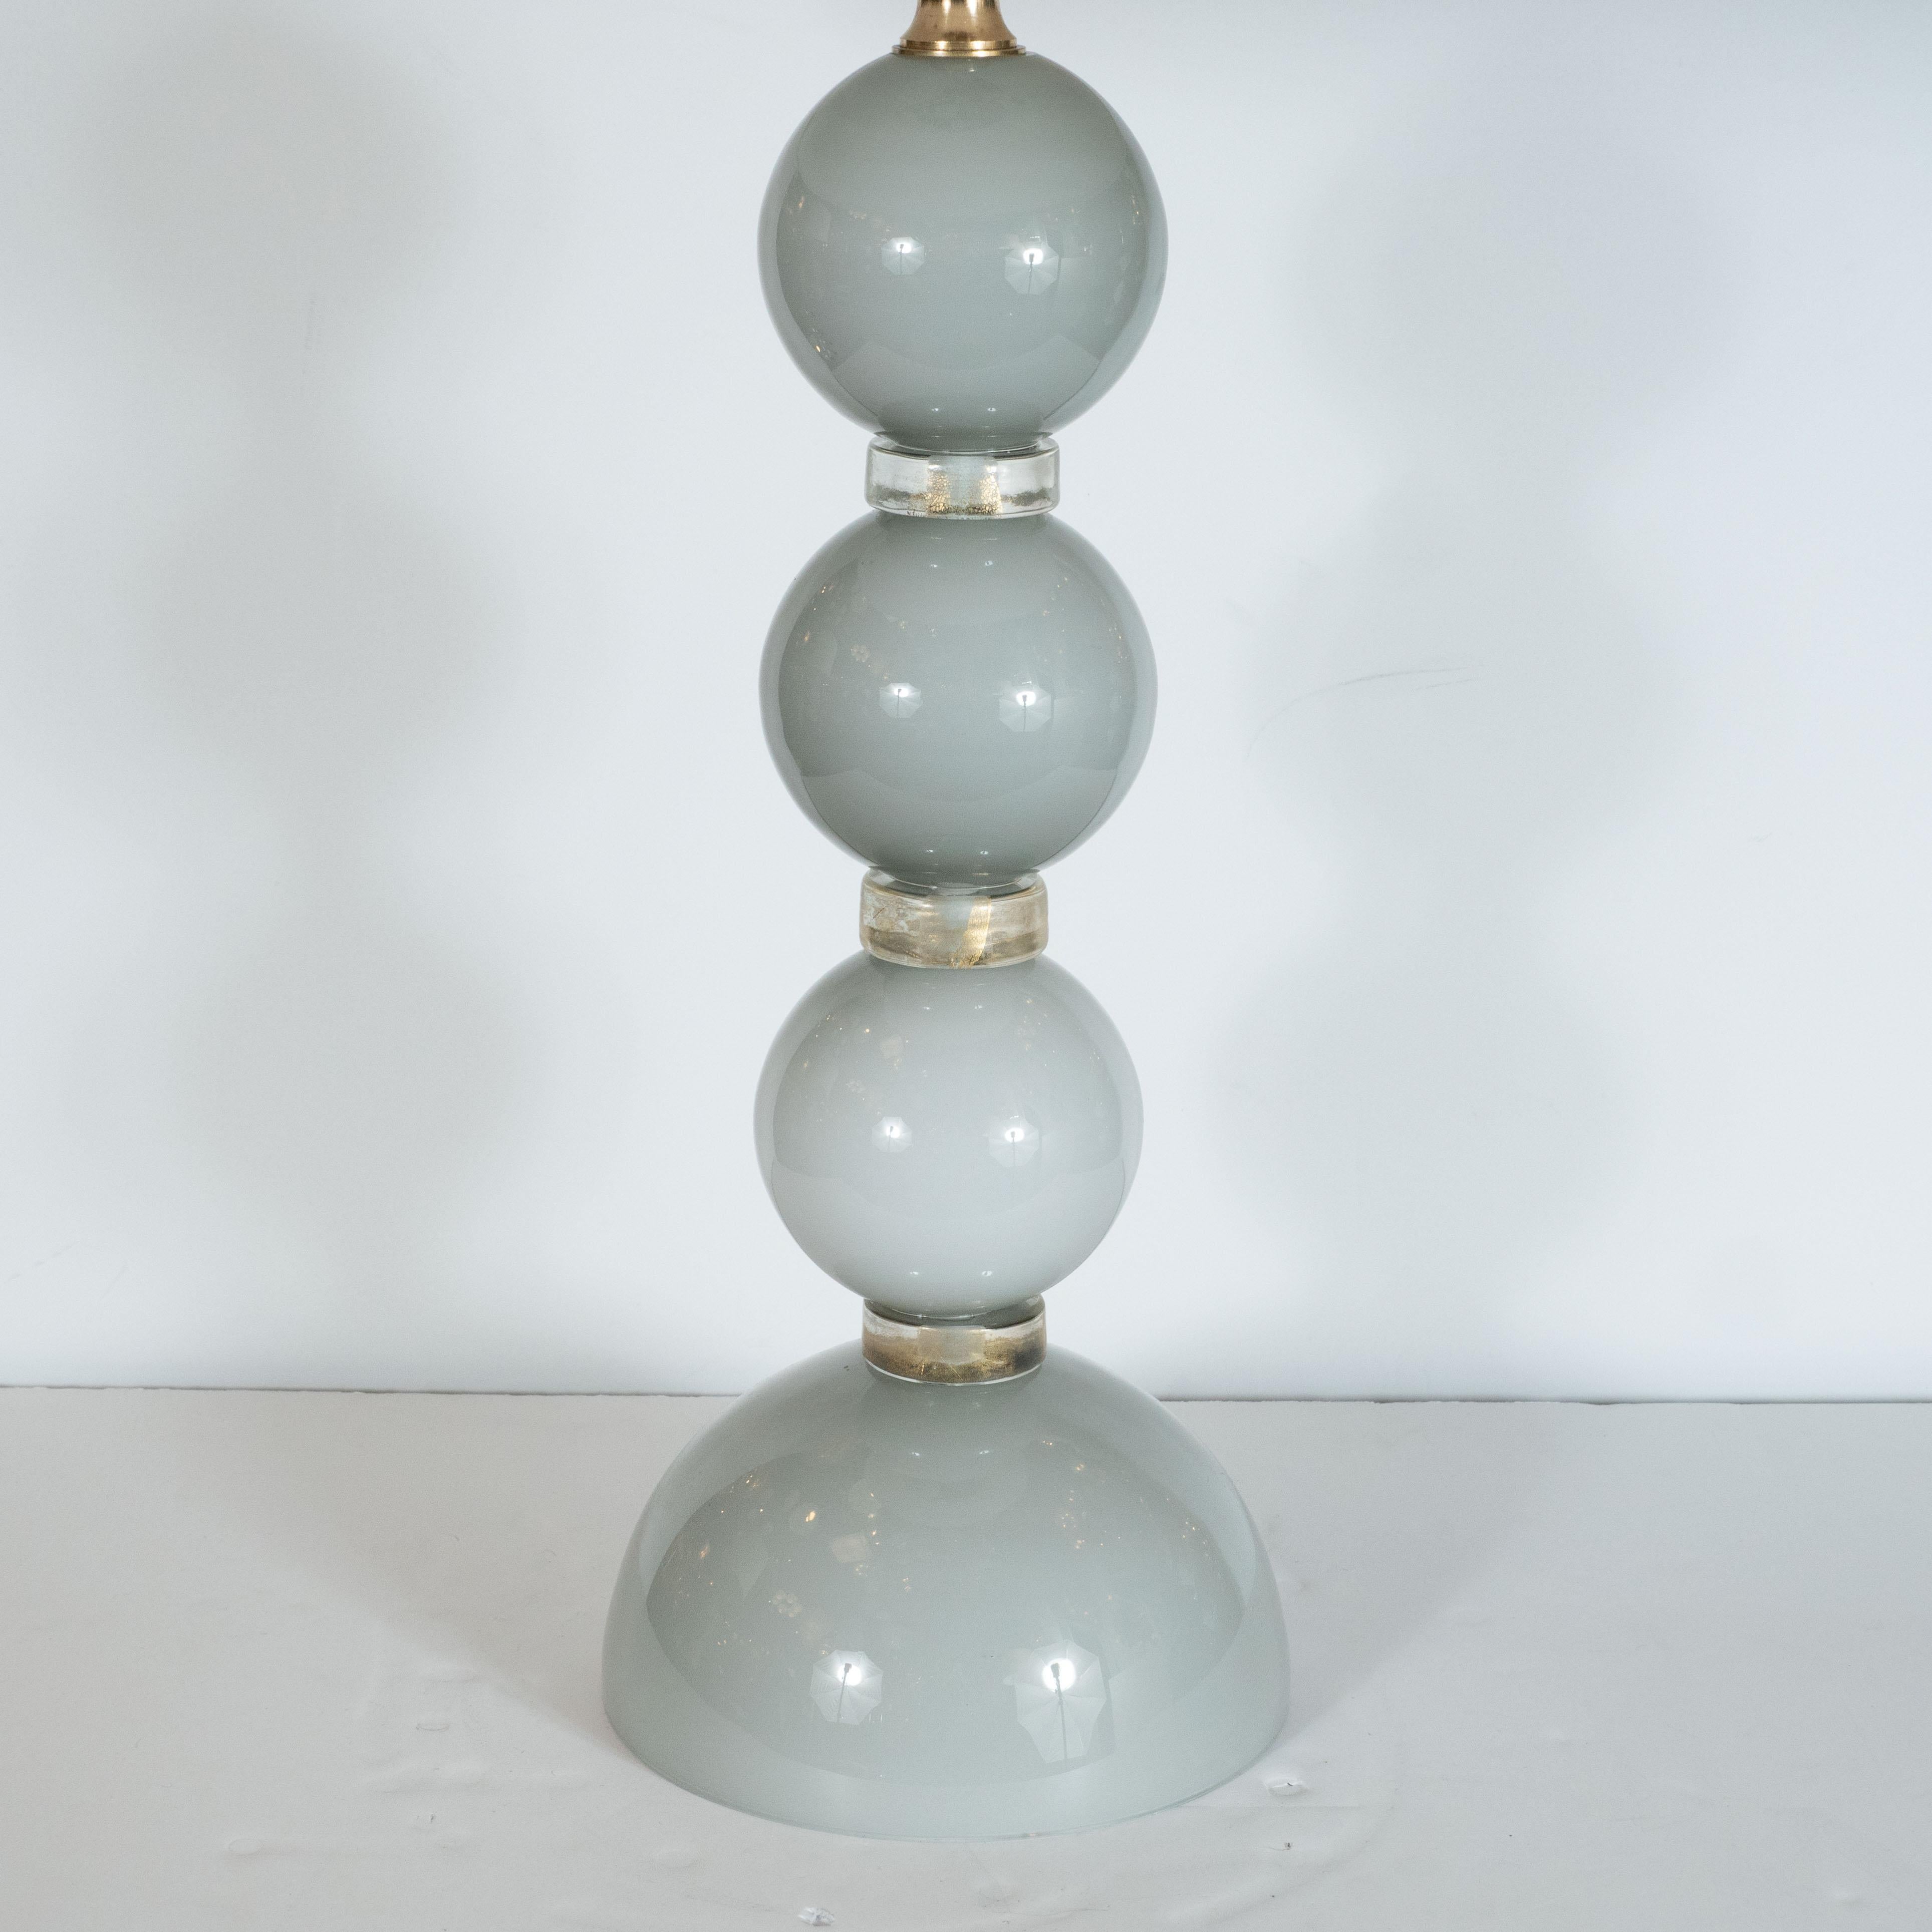 This elegant pair of table lamps were hand blown in Murano, Italy- the islands off the coast of Venice centuries renowned for superlative glass production. Each lamp has three vertically stacked, identical dove grey colored glass spheres which rest